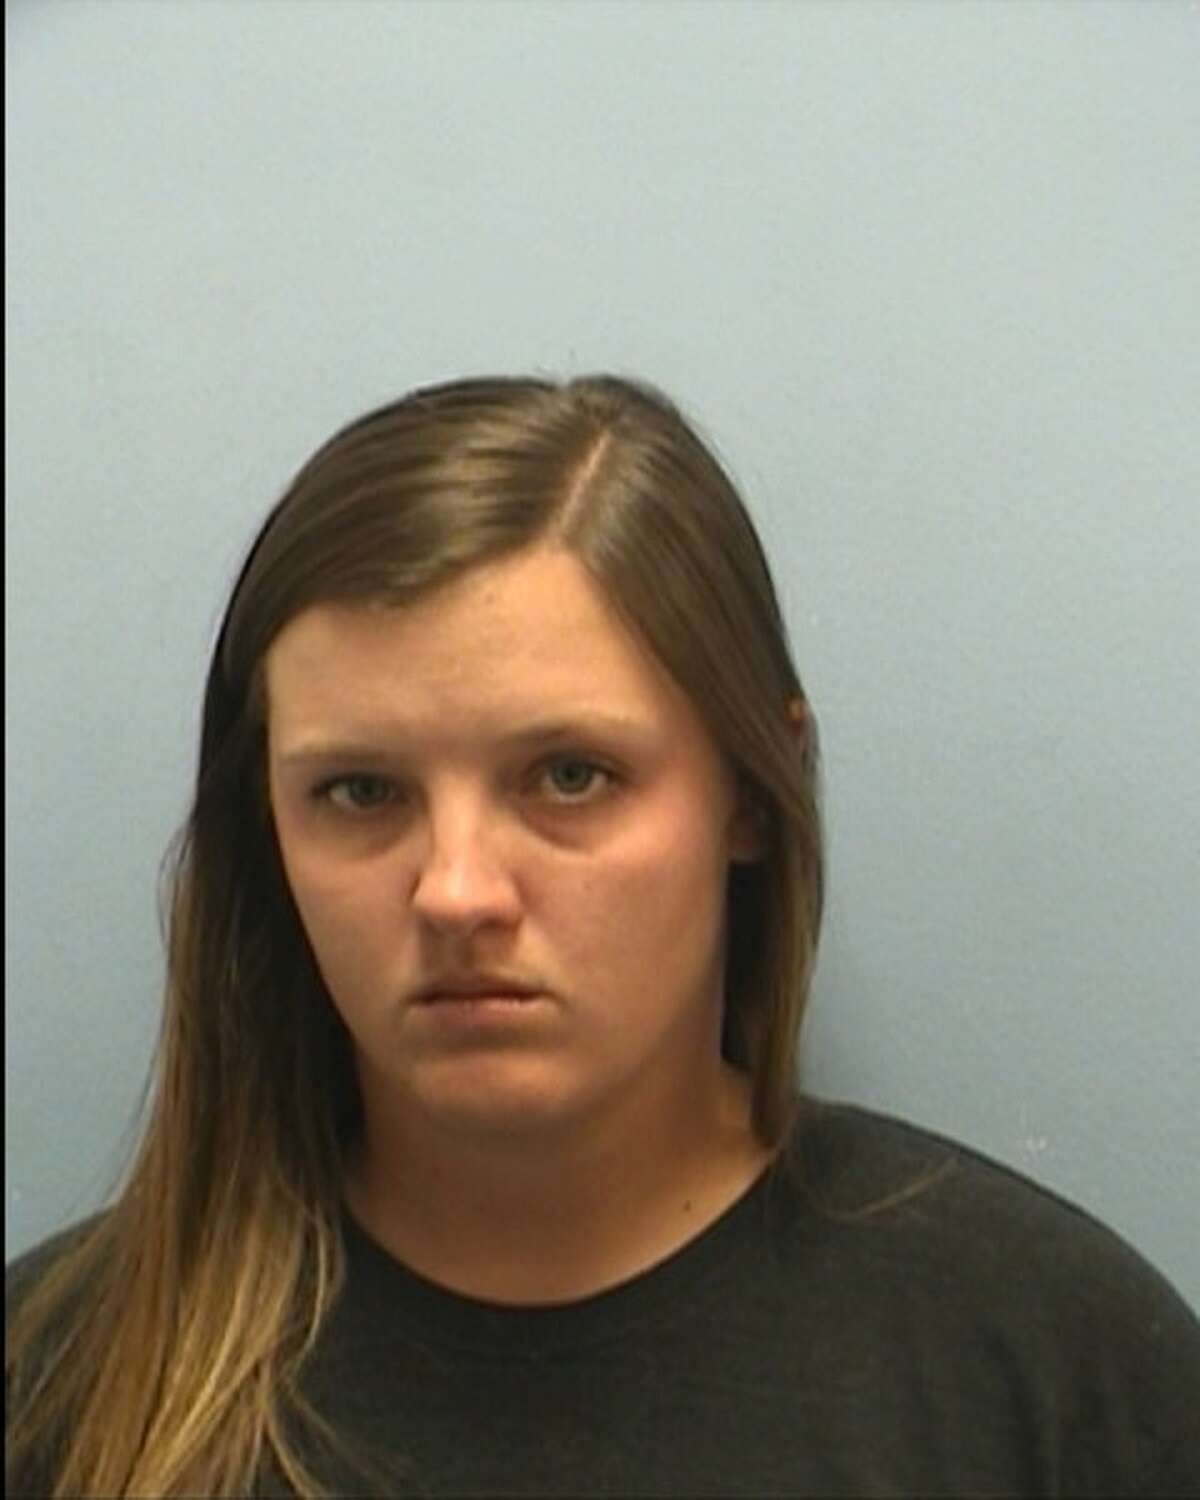 Teacher-student relationships  Kendall Lucas, 25, was recently accused of having an sexual relationship with a 17-year-old female student. Lucas taught softball, volleyball and business education at Taylor High School, near the Austin-area. Click through to see other teacher-student relationships in Texas.